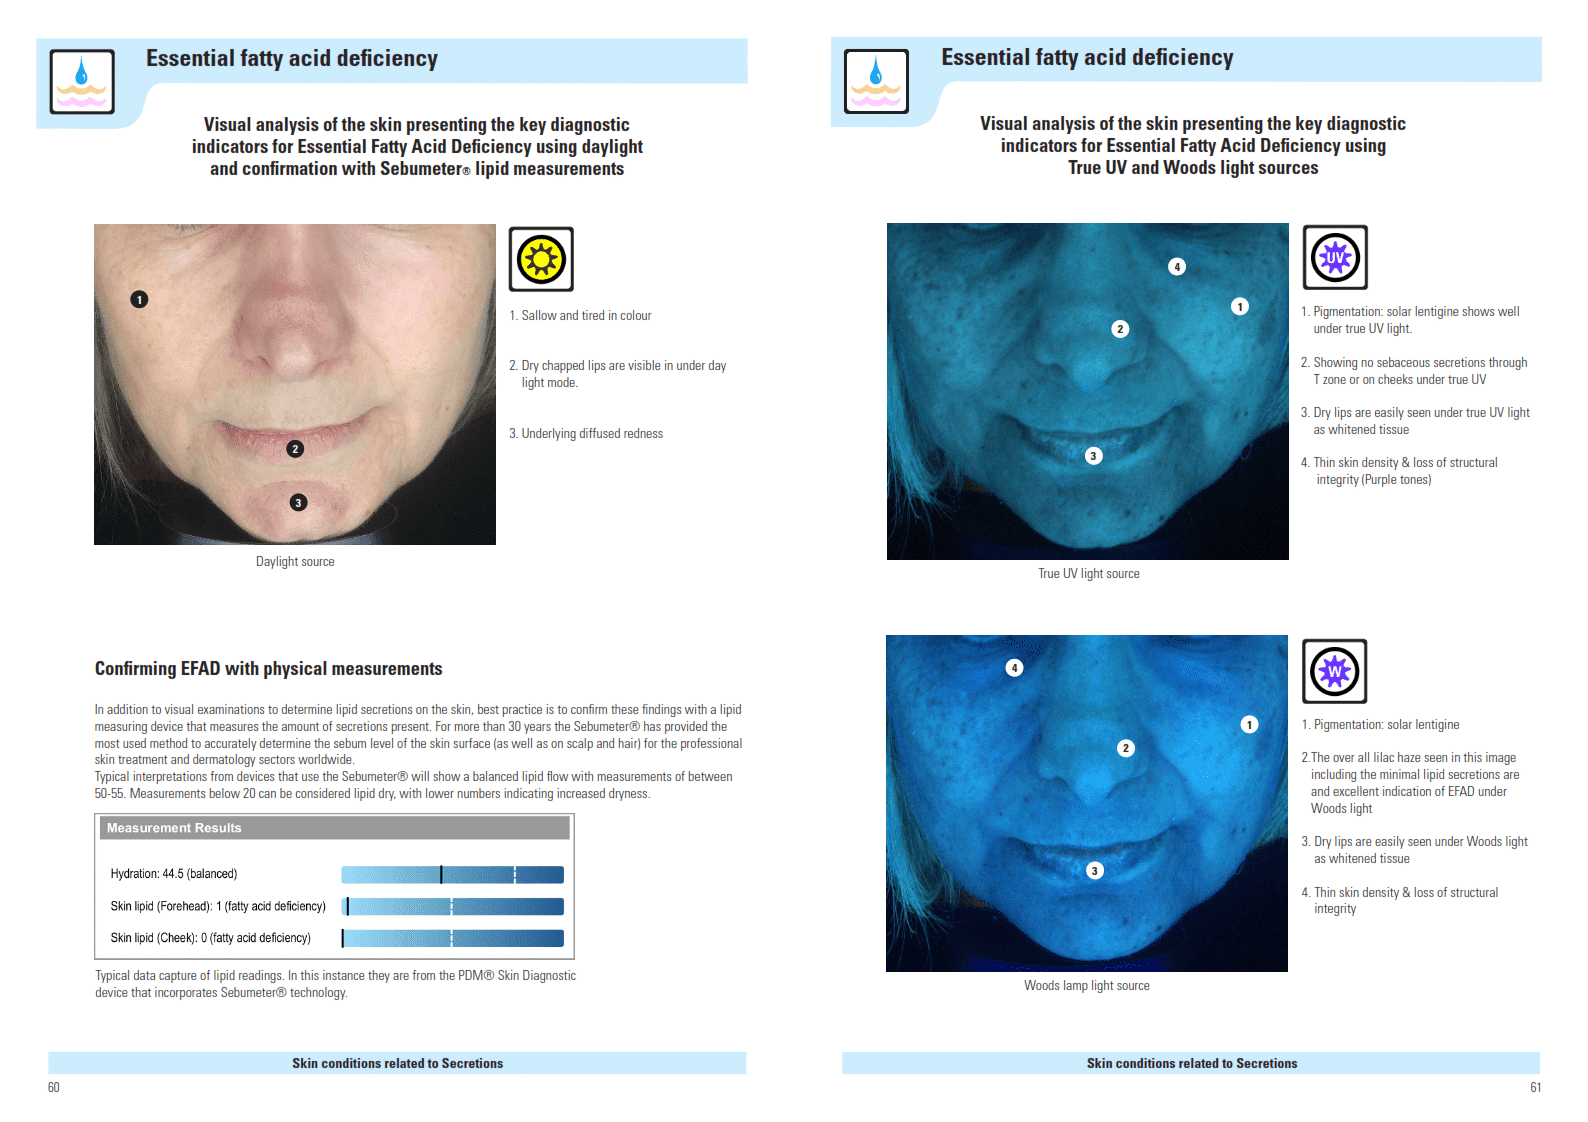 Sample pages from the Visual Skin Analysis Diagnostic Indicator Guide